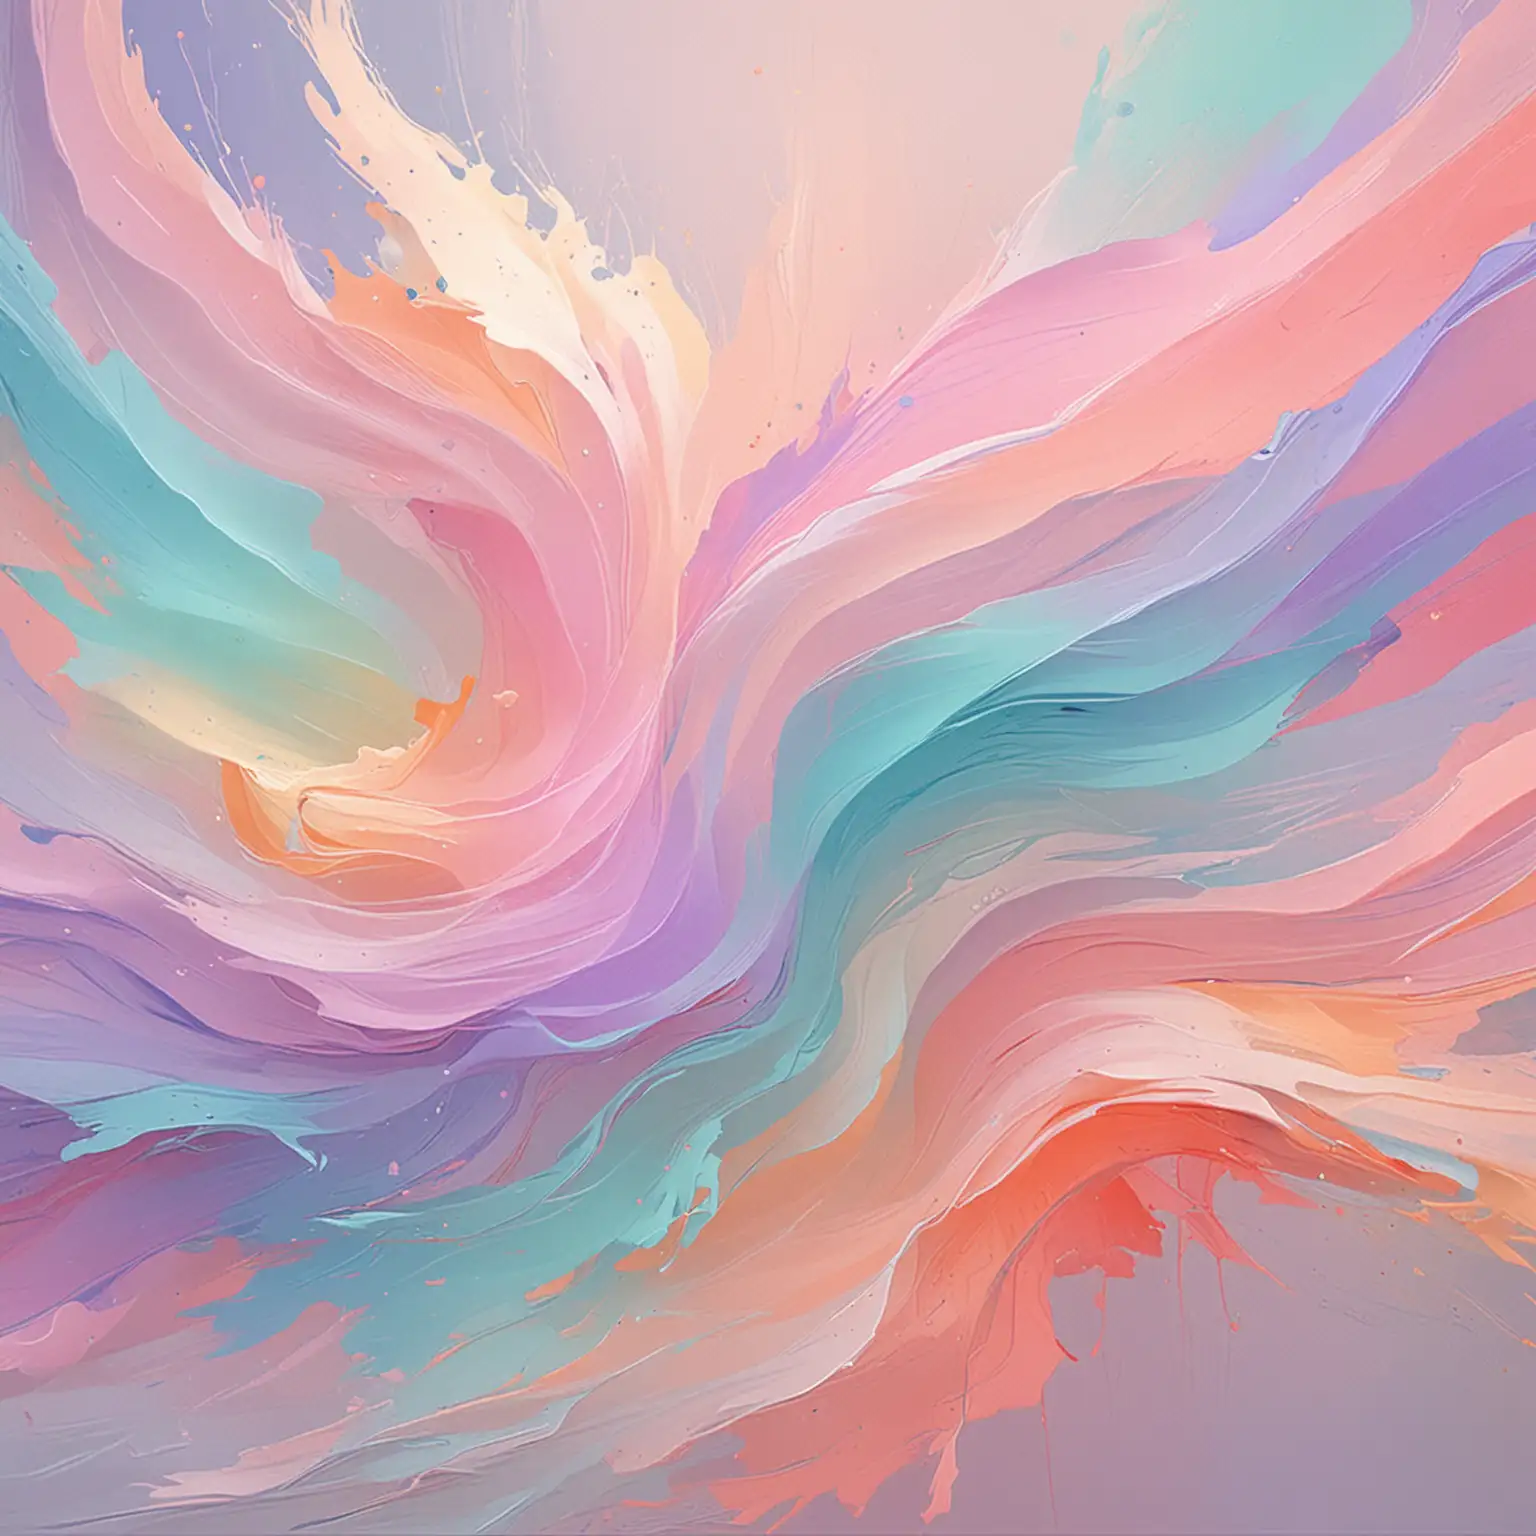 Vibrant pastel colors, Abstract Artwork 